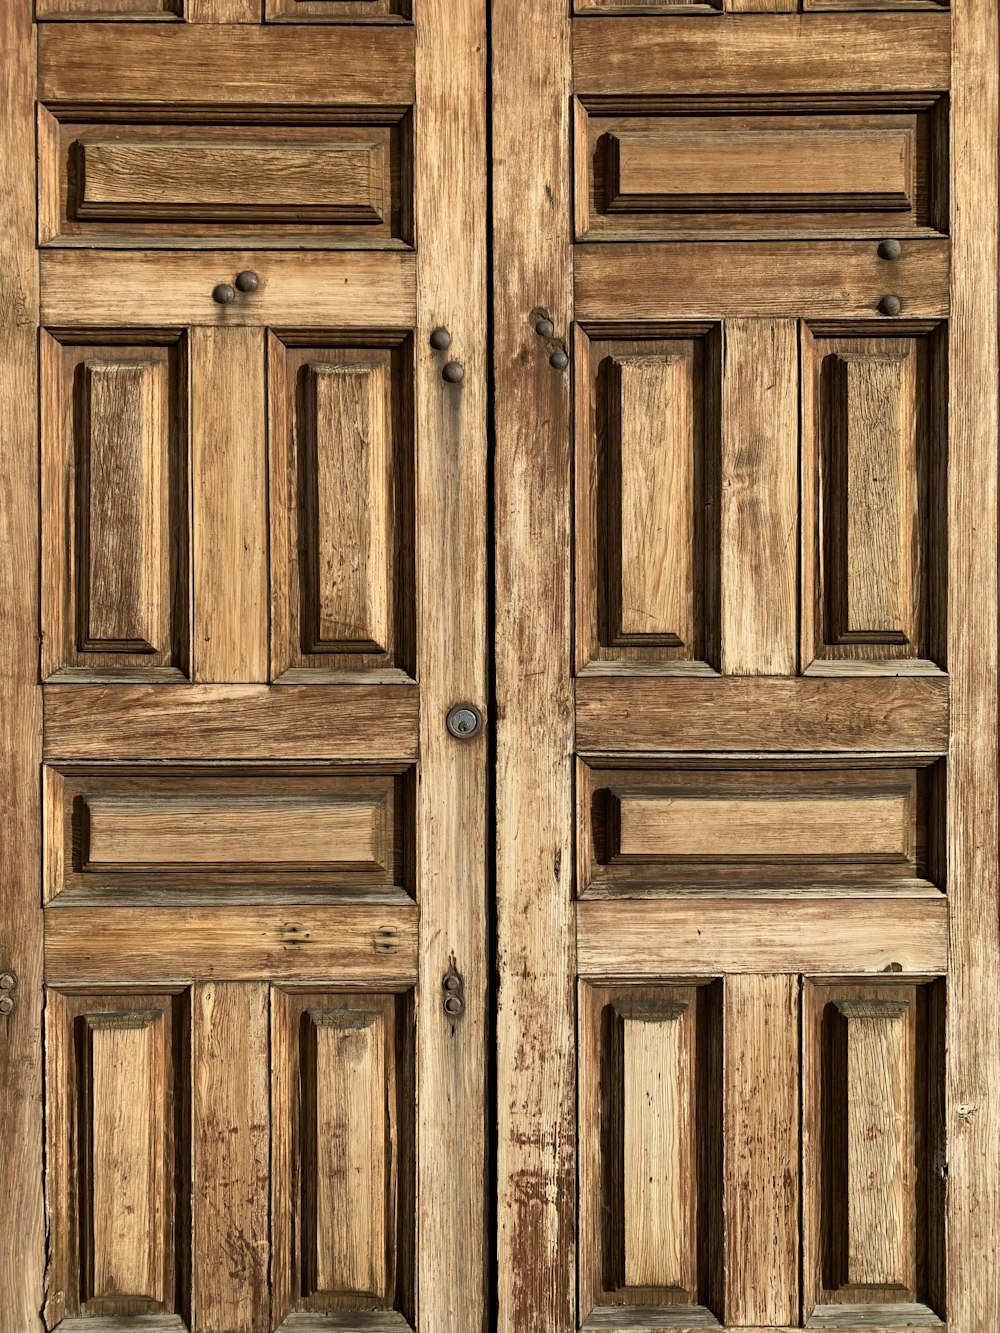 a close up of a wooden door with no glass